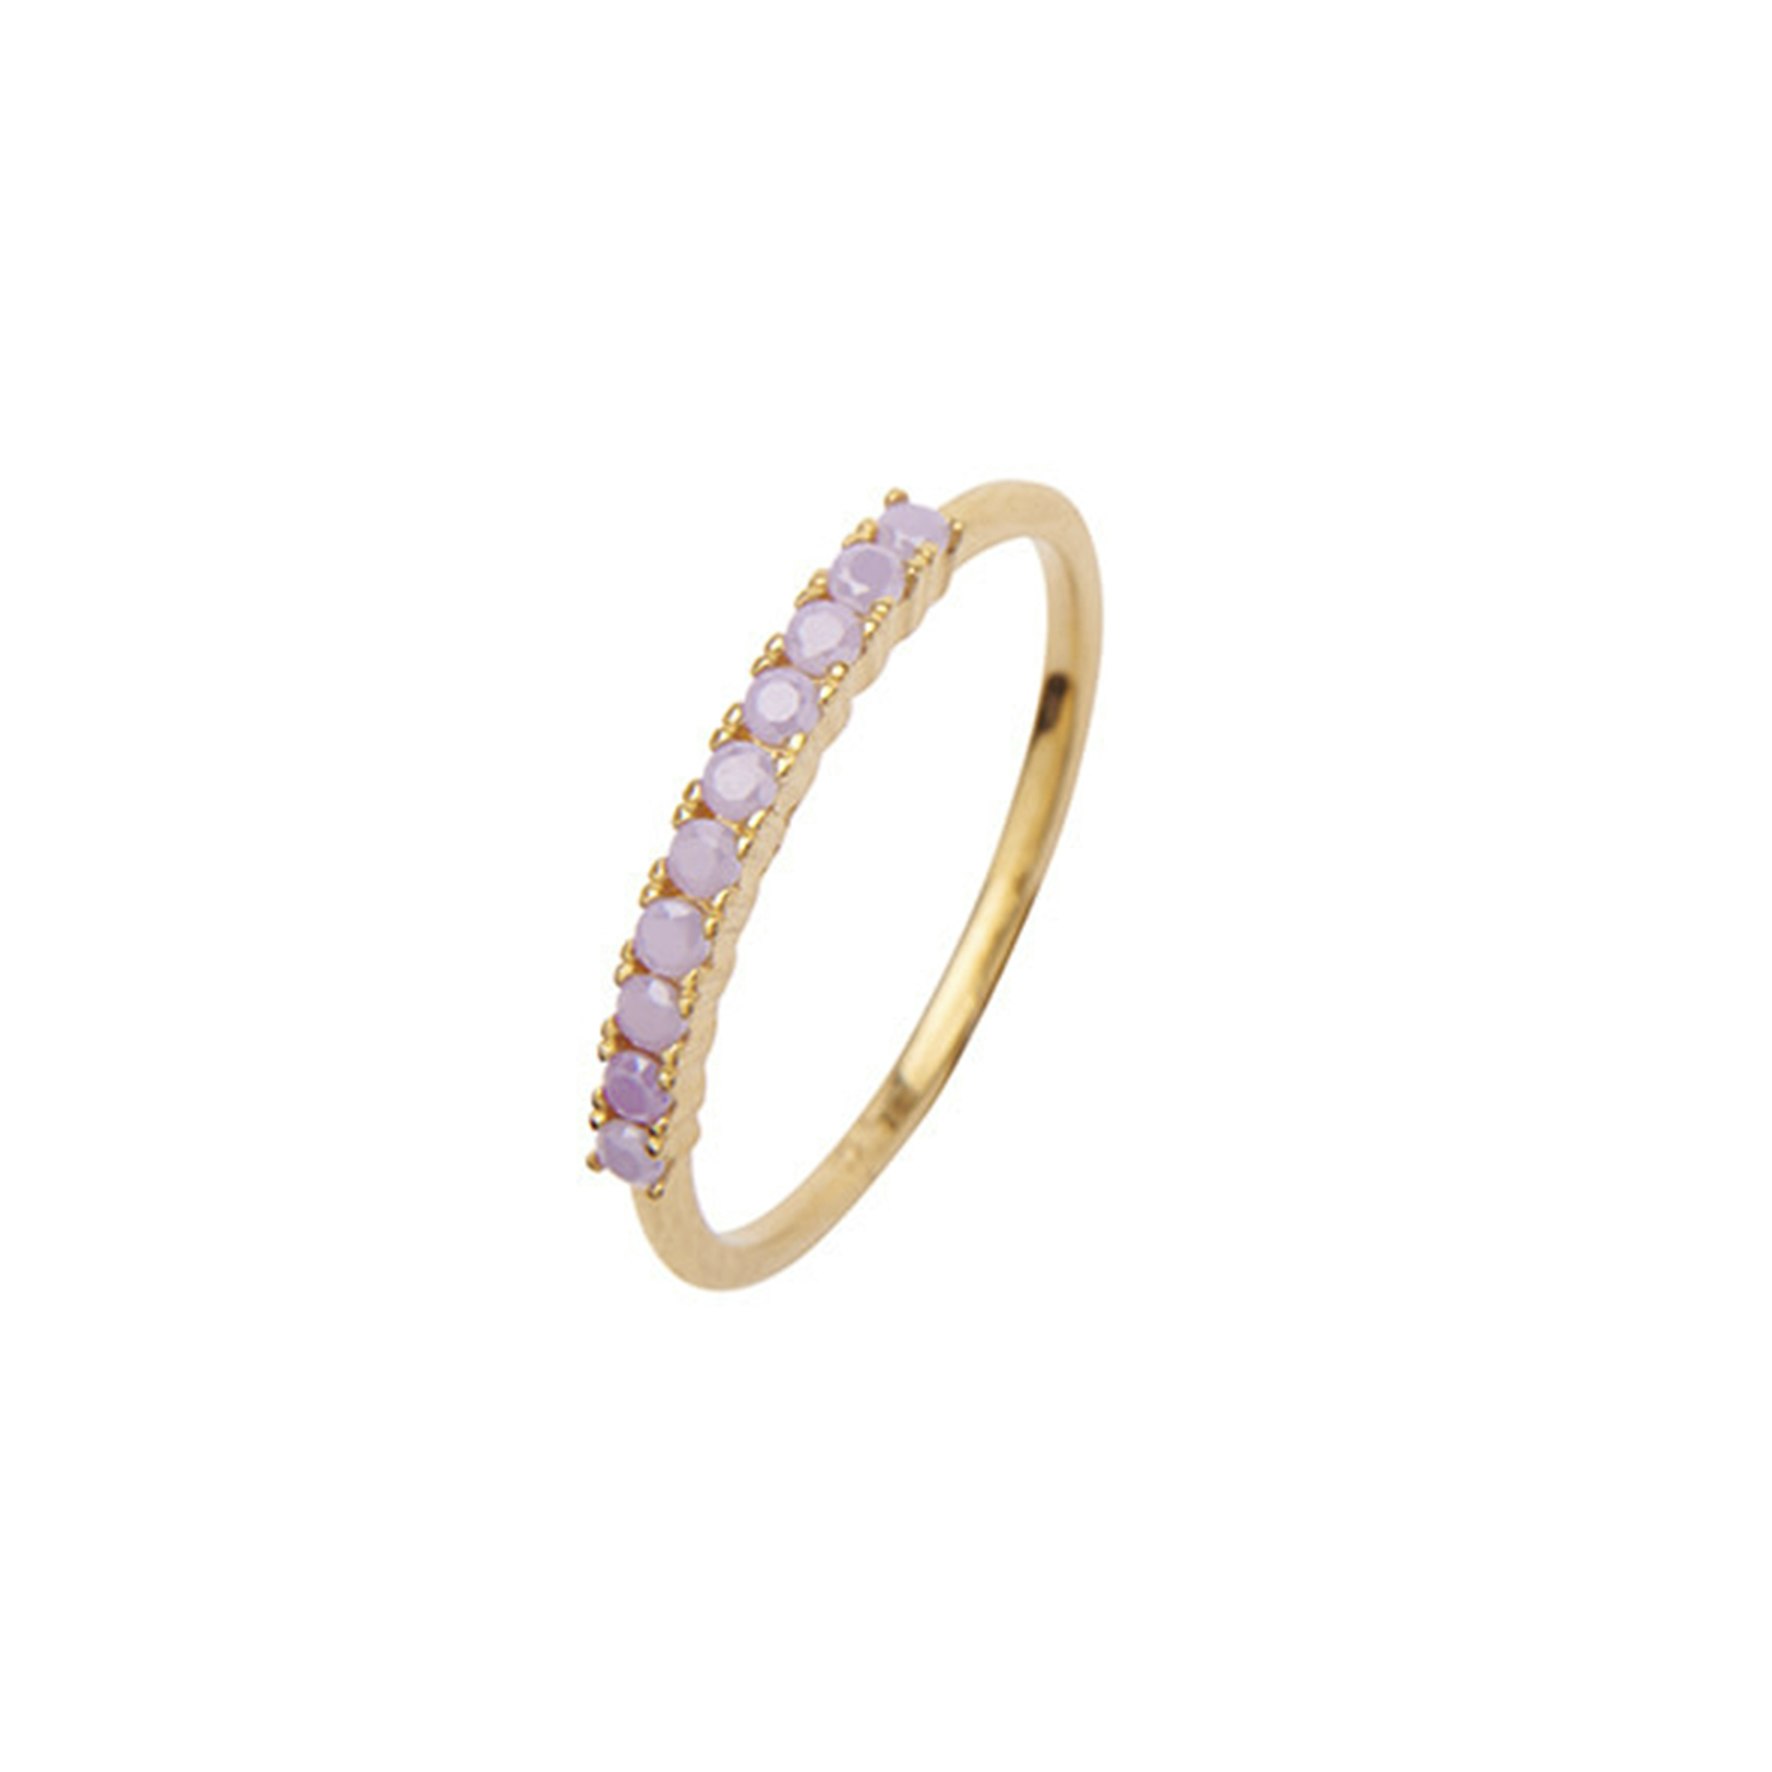 Fineley Crystal Ring Purple from Pico in Goldplated-Silver Sterling 925